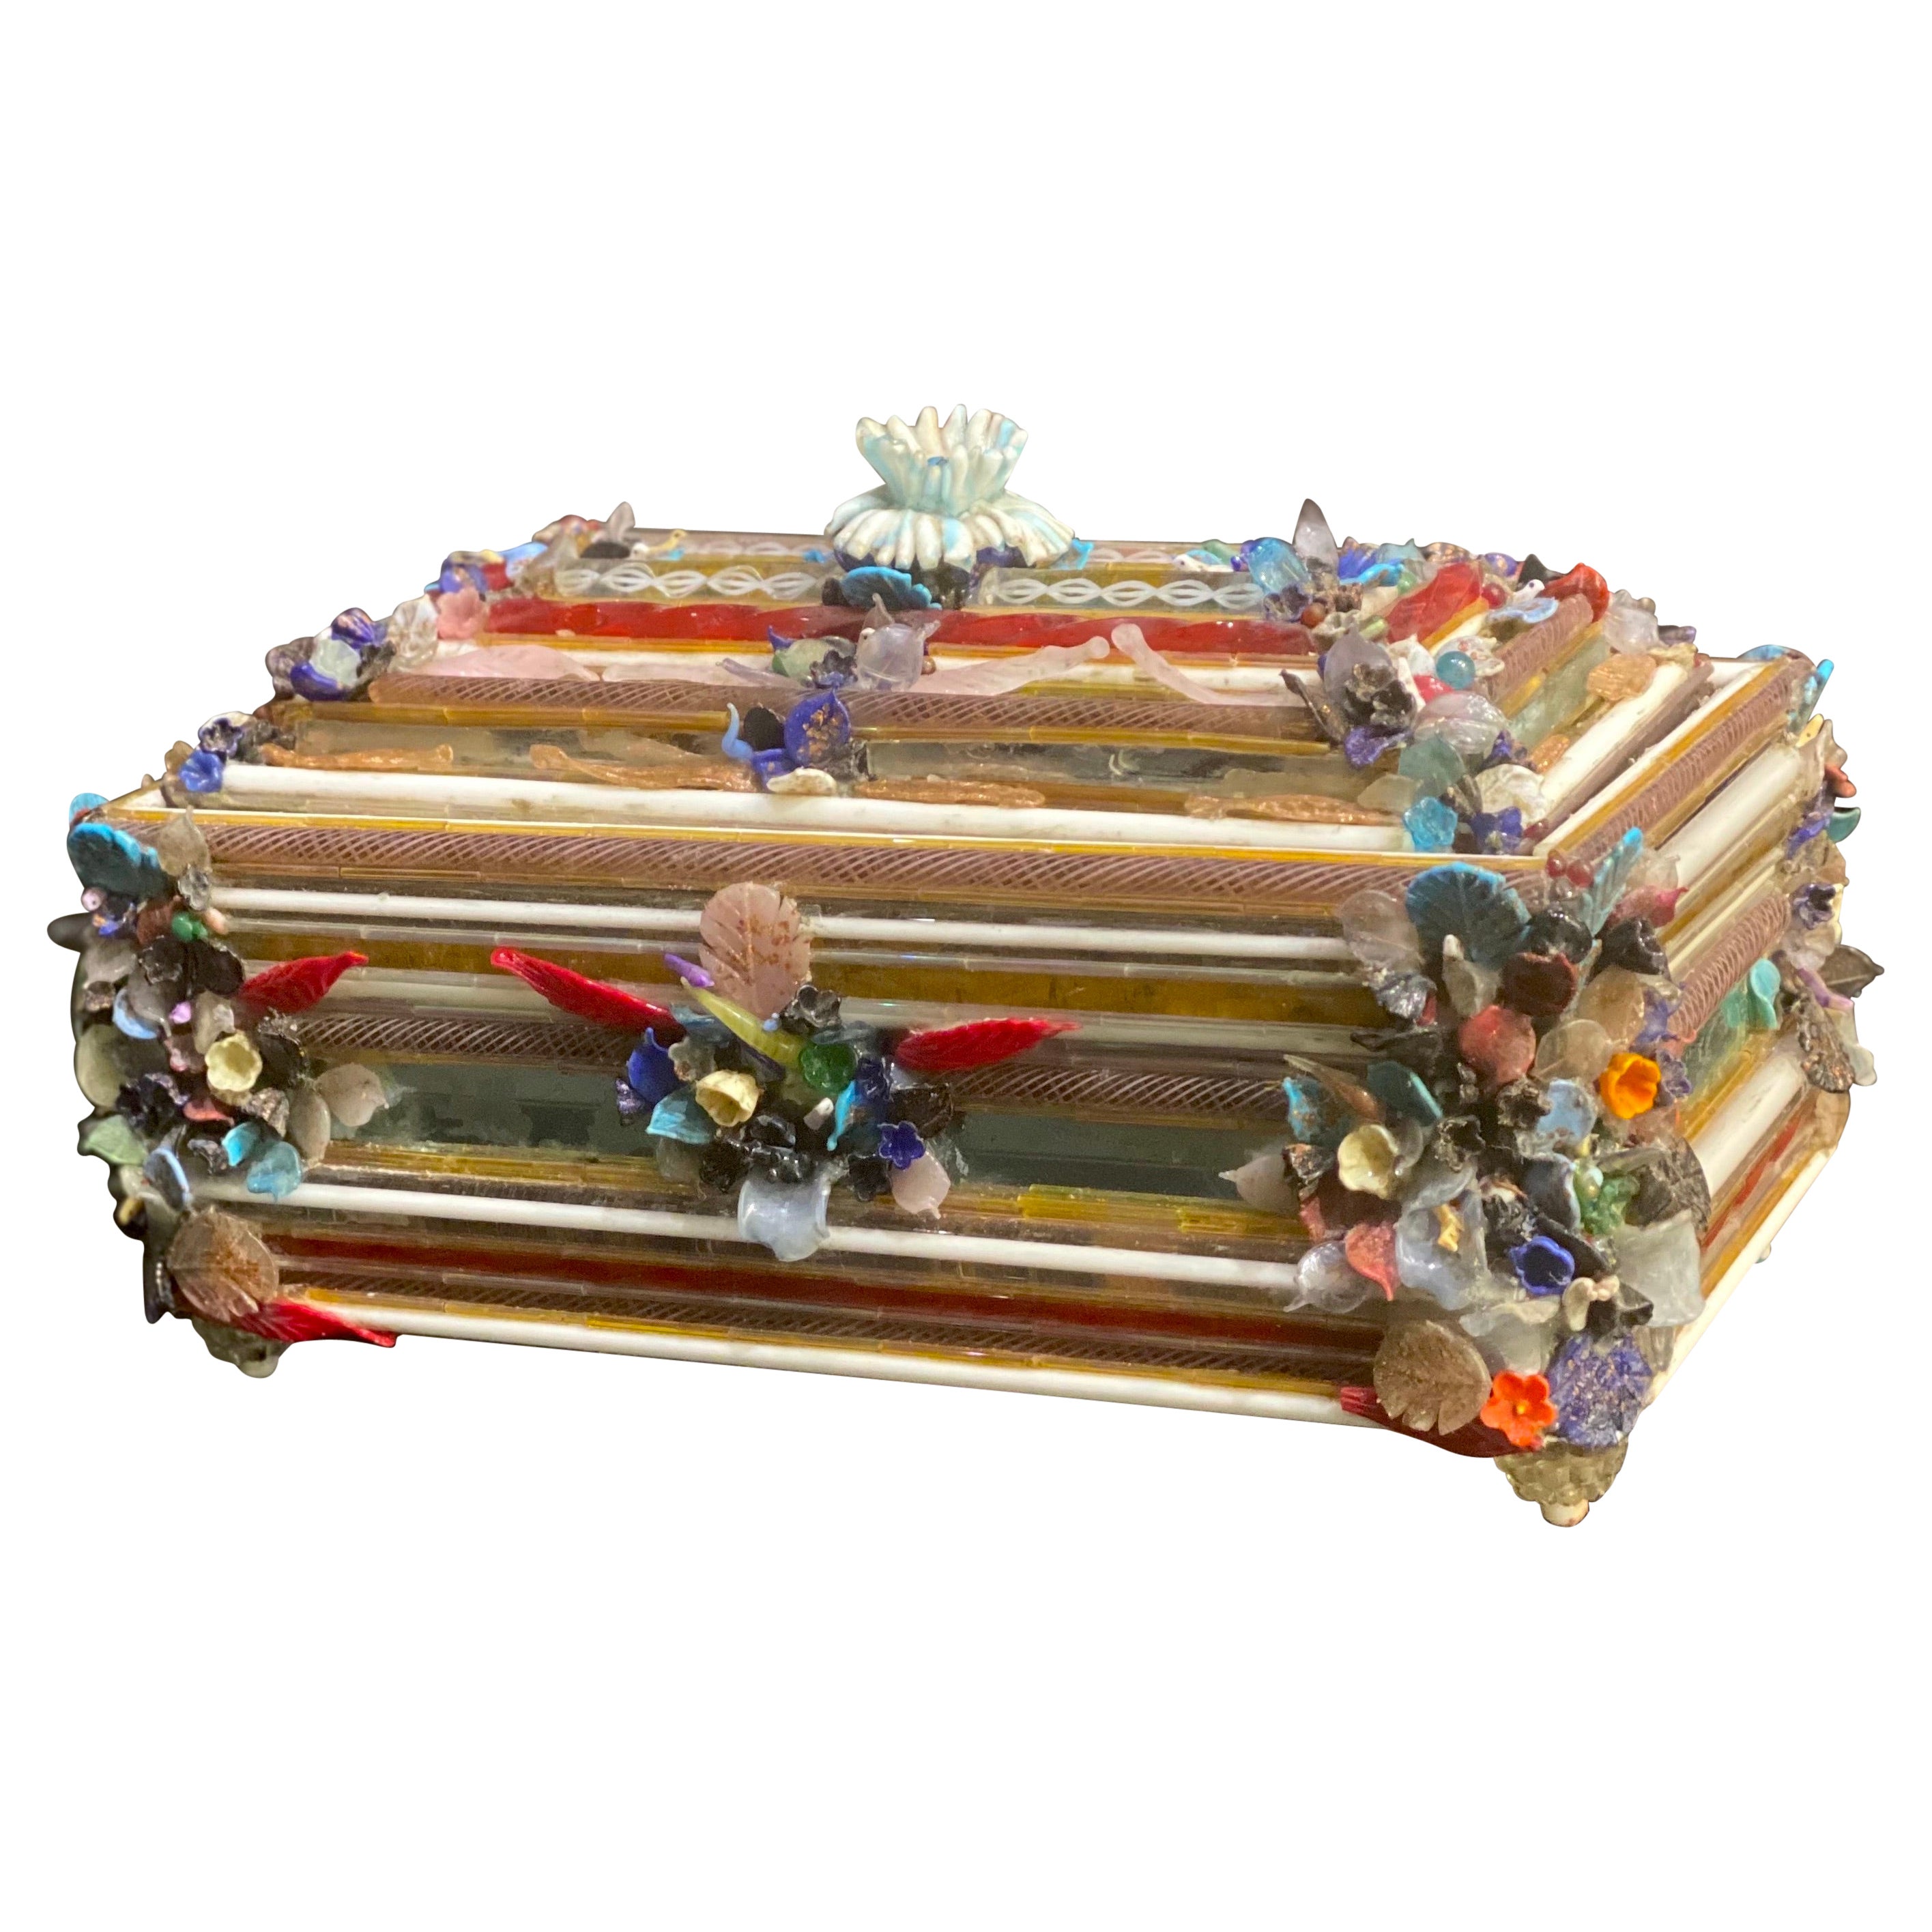 Exceptional Murano Glass Jewel or Dresser Box  1930' For Sale